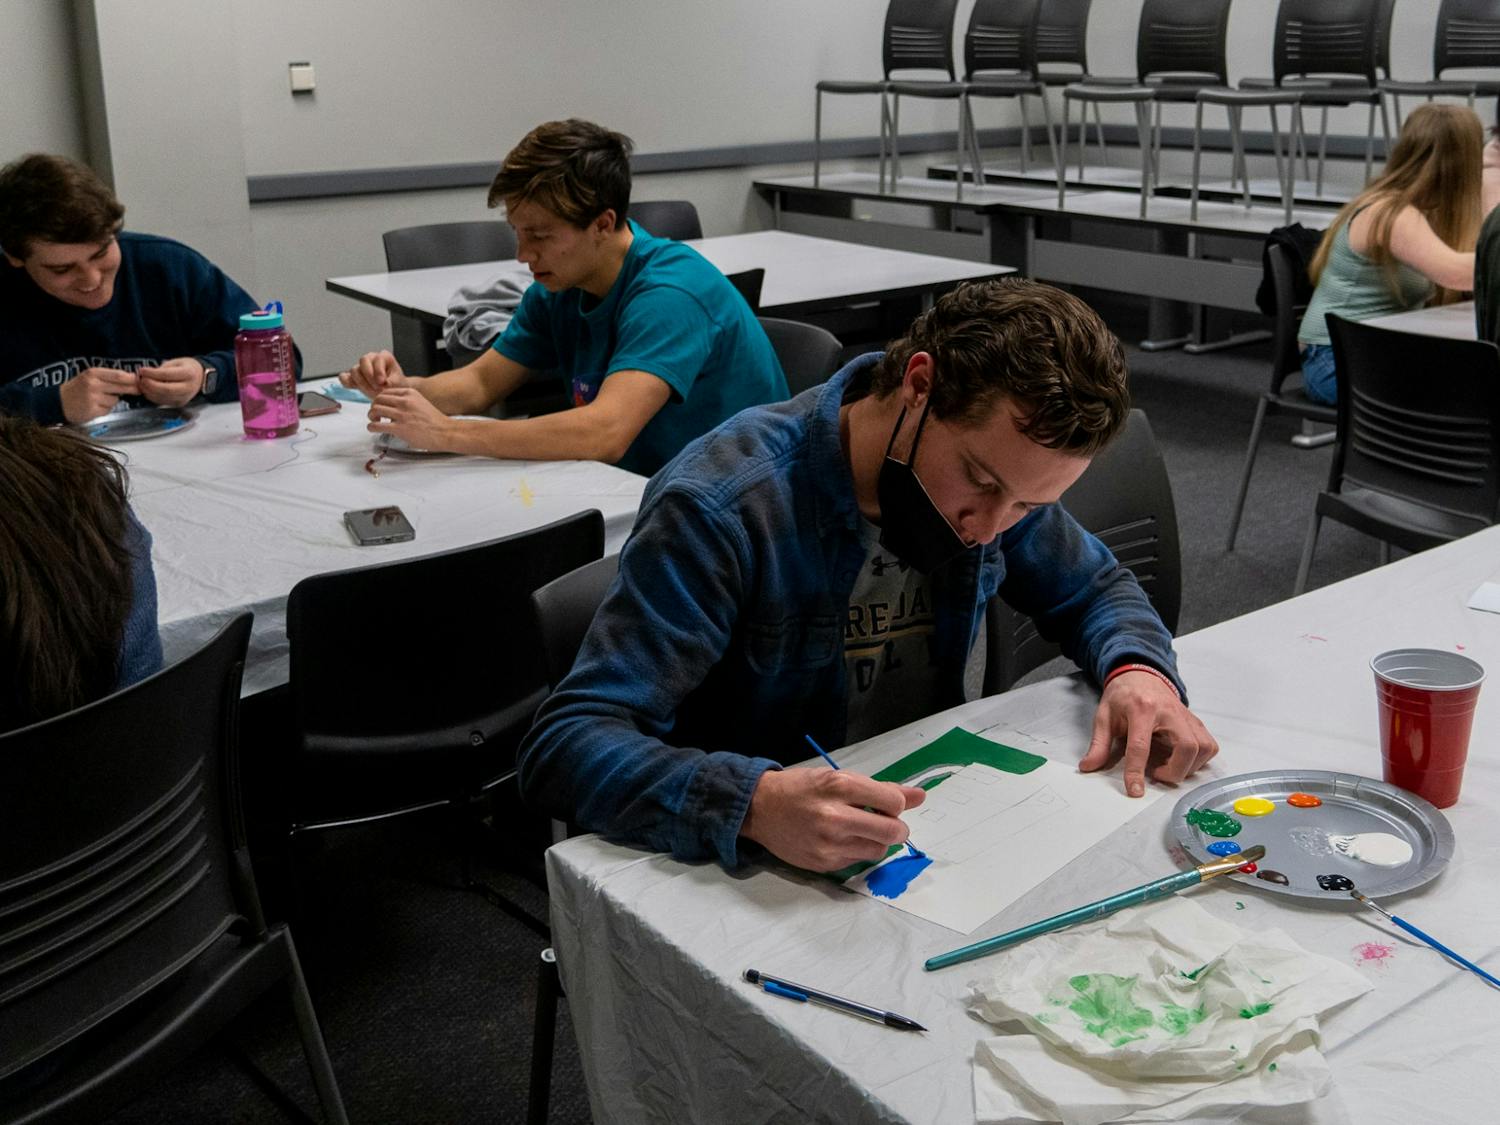 USC students meet on the fourth floor of the Callcott building for painting and bracelet making. USC’s Art Therapy Club meets bi-weekly and hosts a variety of arts and crafts activities for its members.